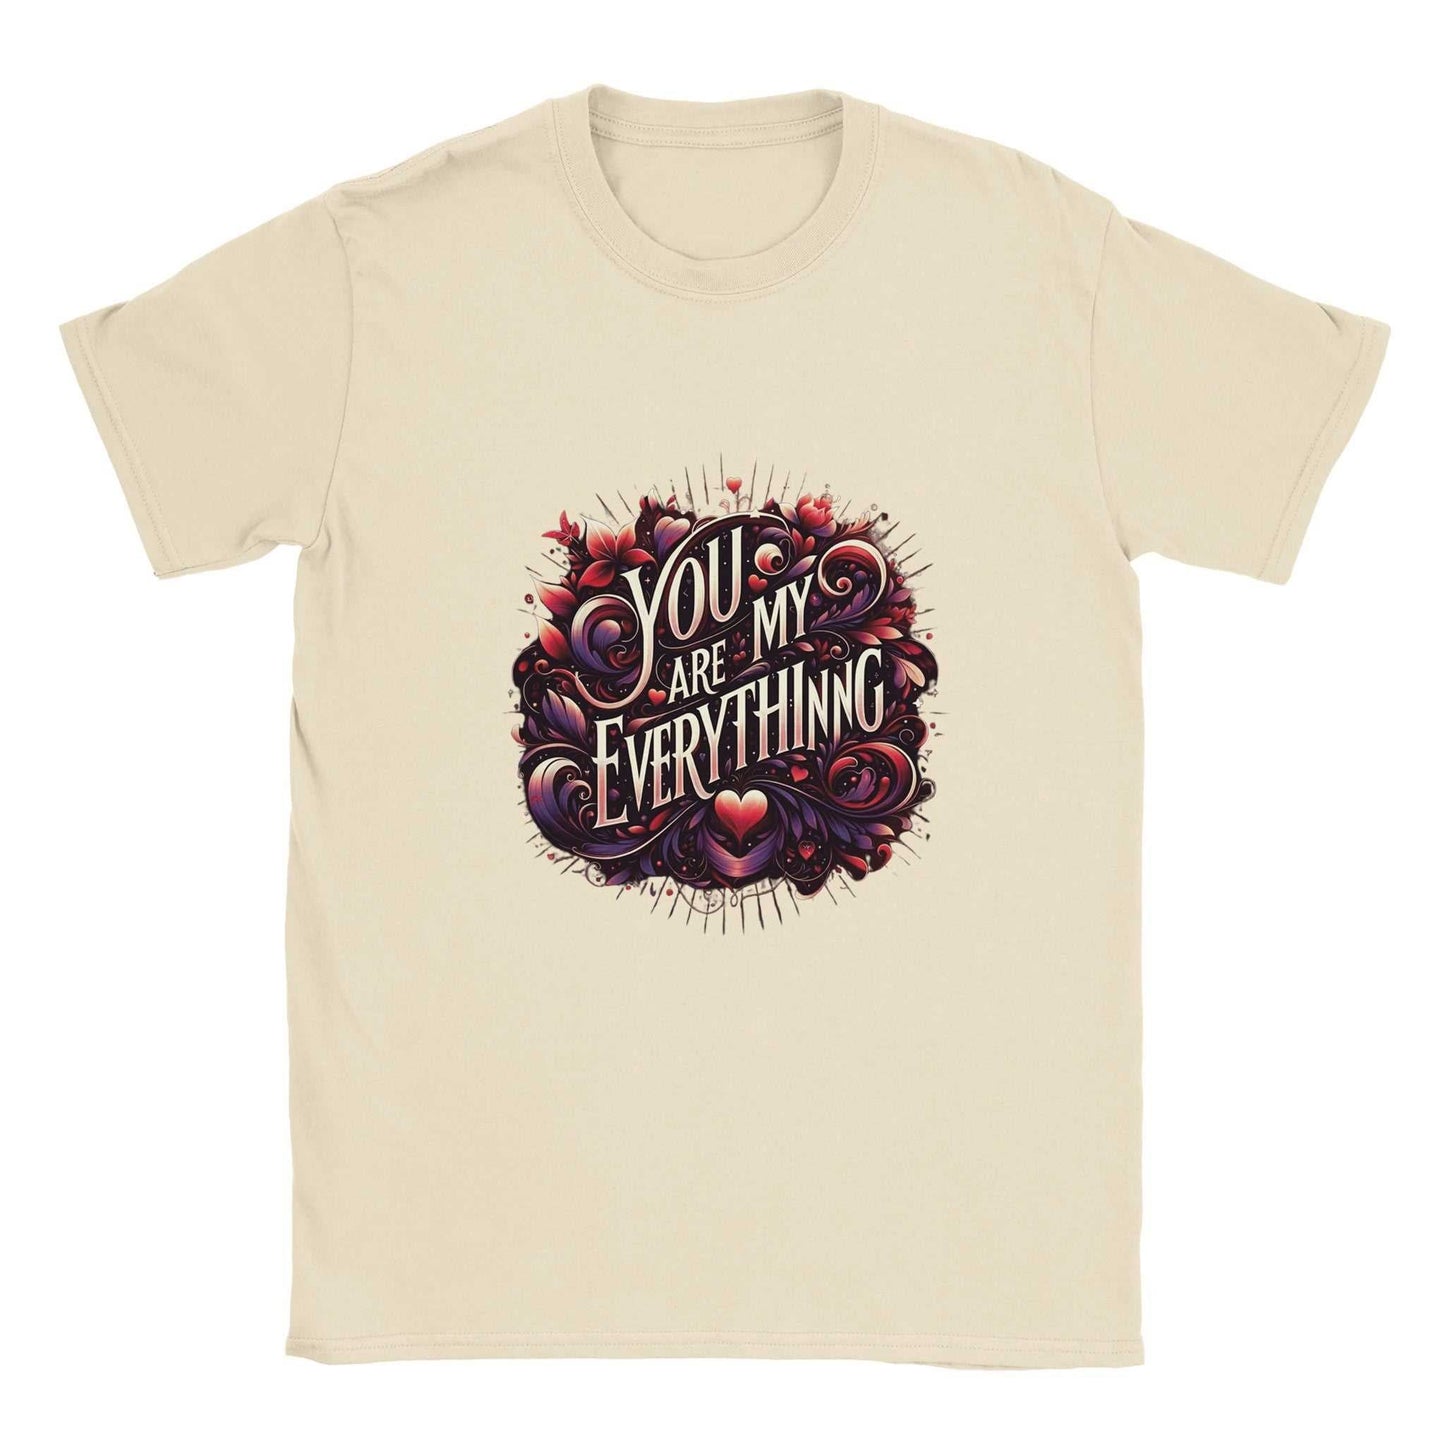 "You Are My Everything" Love T-Shirt - 100% soft, breathable cotton - BeinCart